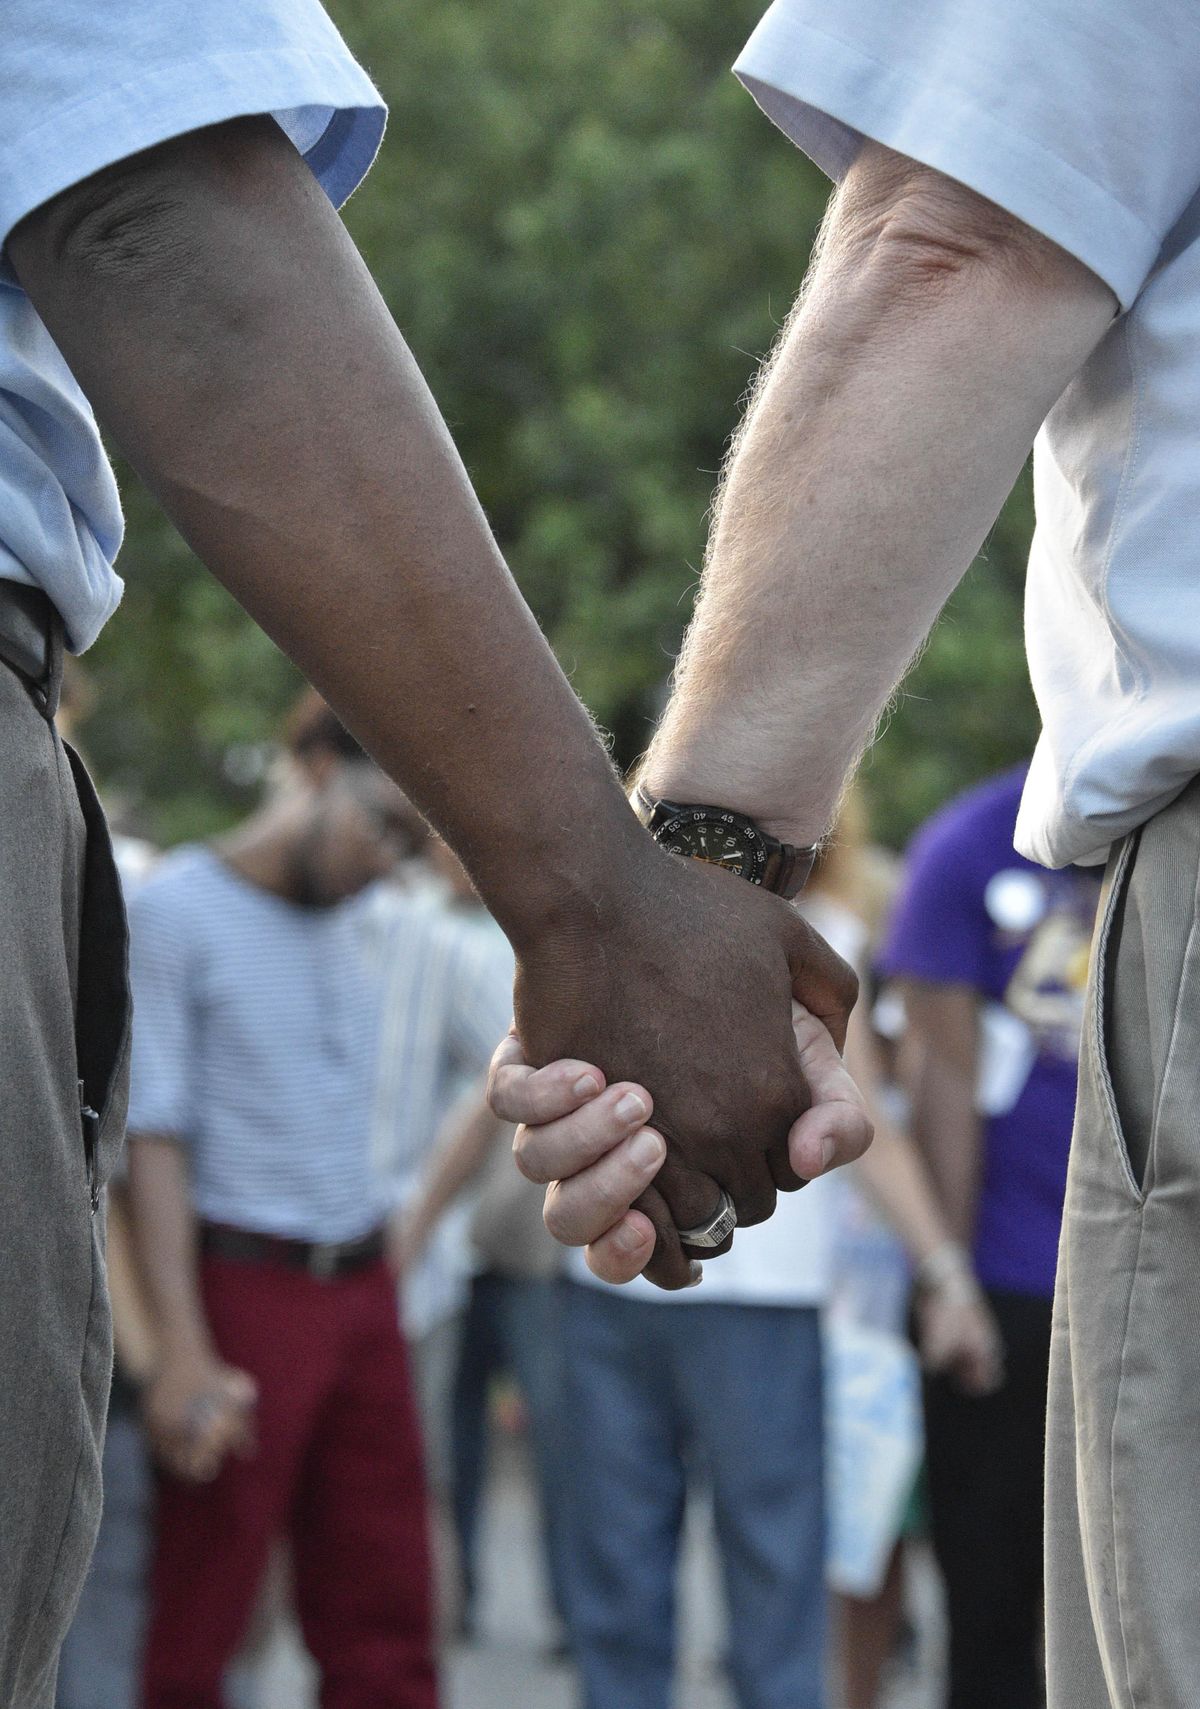 People hold hands at a vigil and march to the Fallen Officer Memorial in Huntsville, Ala., on Friday. (Bob Gathany / AP)